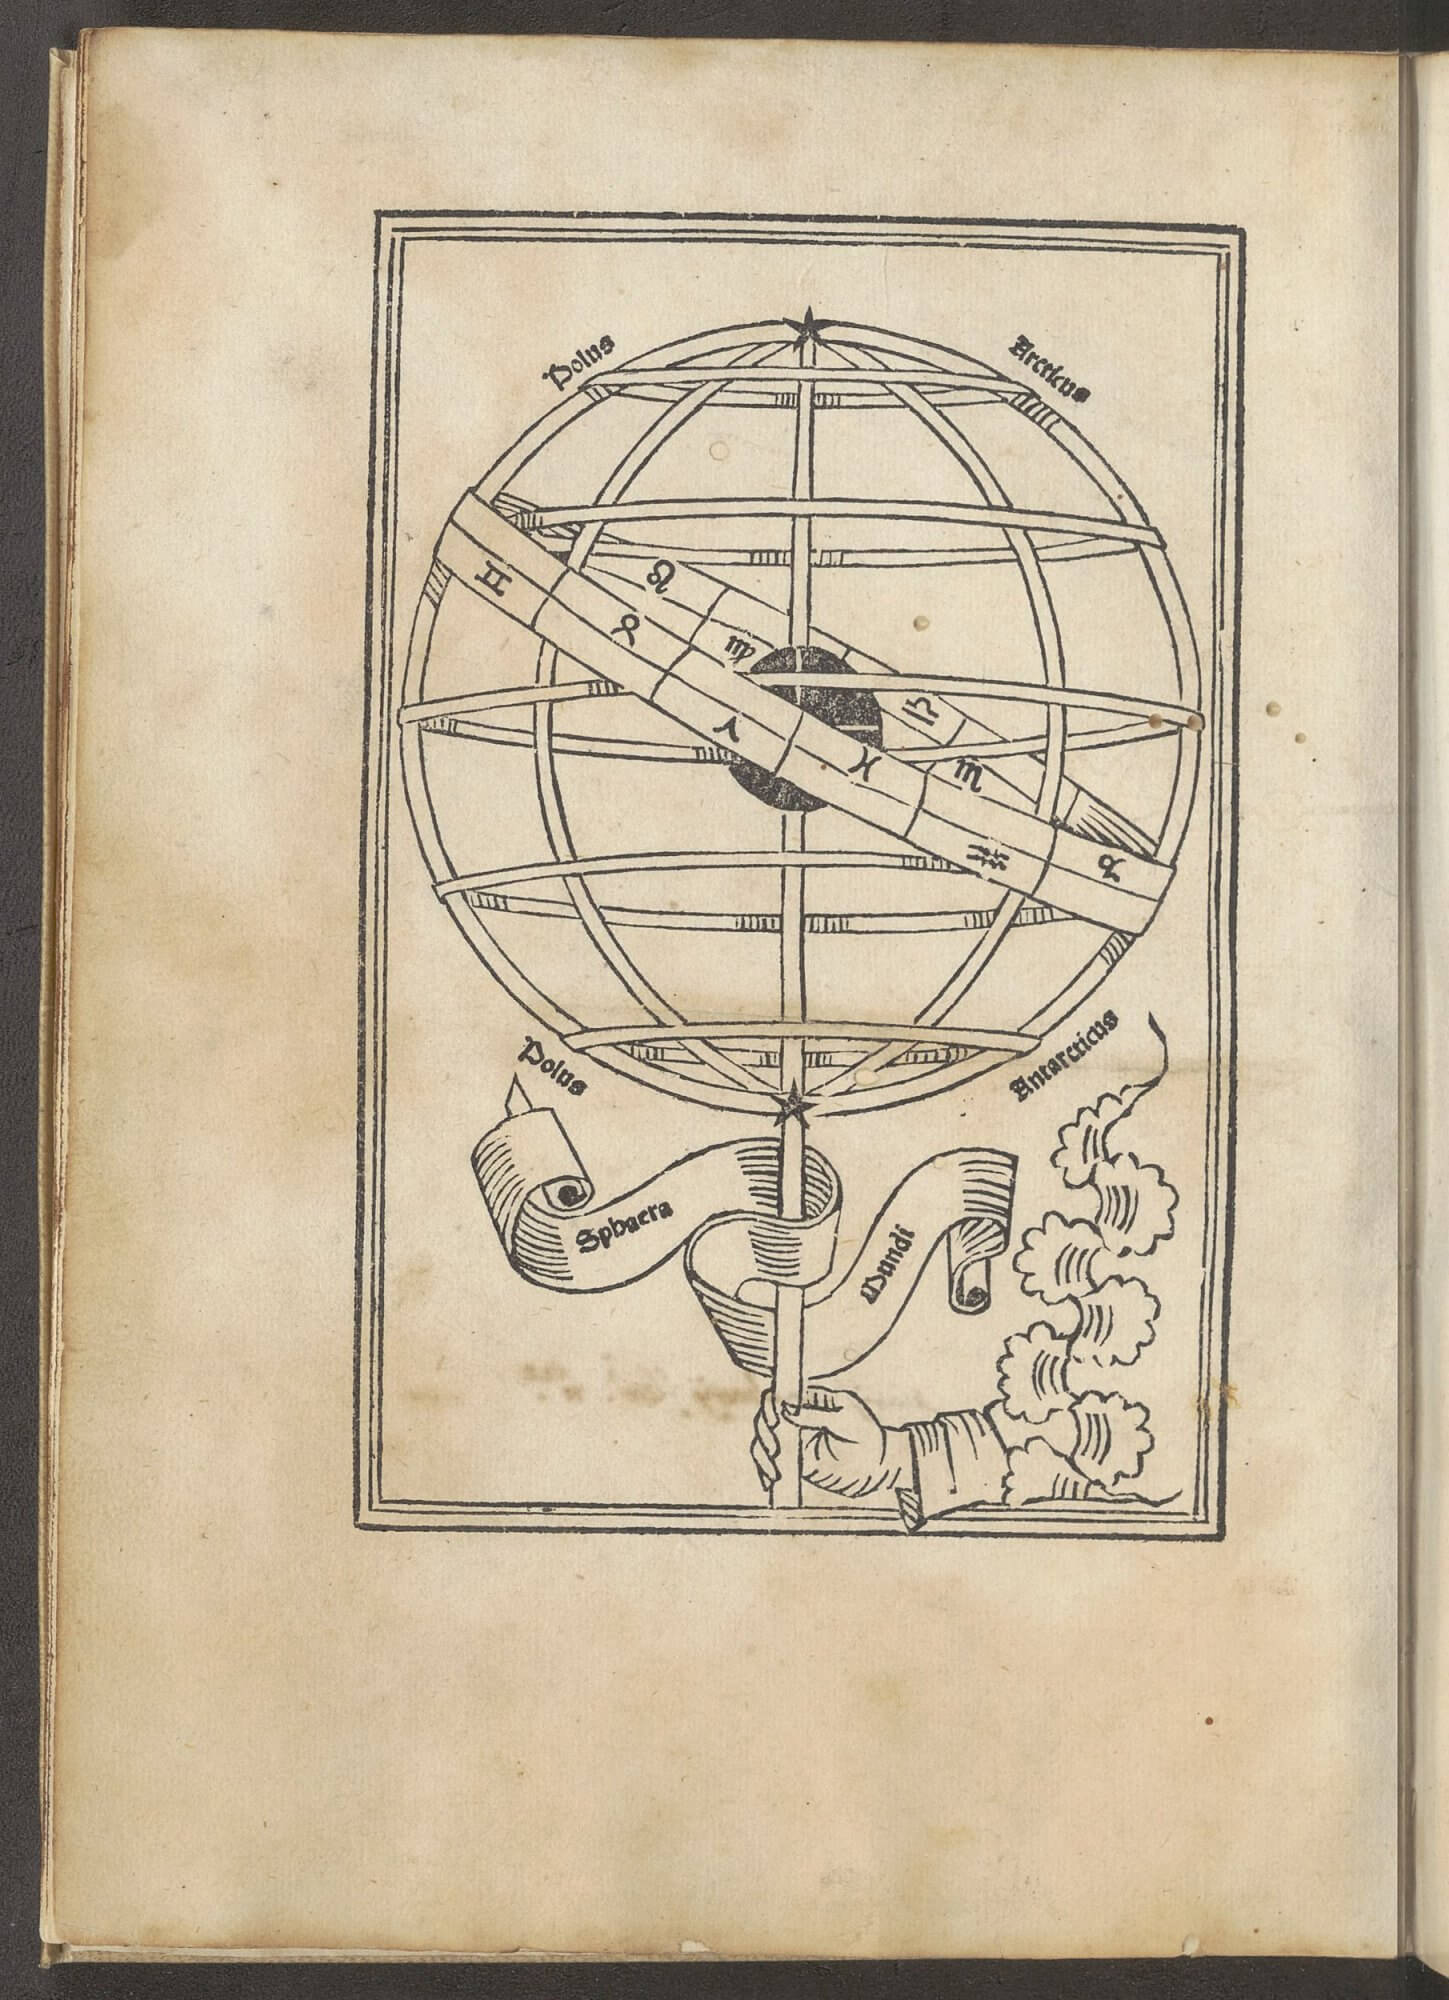 This woodcut---one of the standard ones accompanying Sacrobosco's astronomical textbook---is in this edition facing the beginning of the text and the incipit.